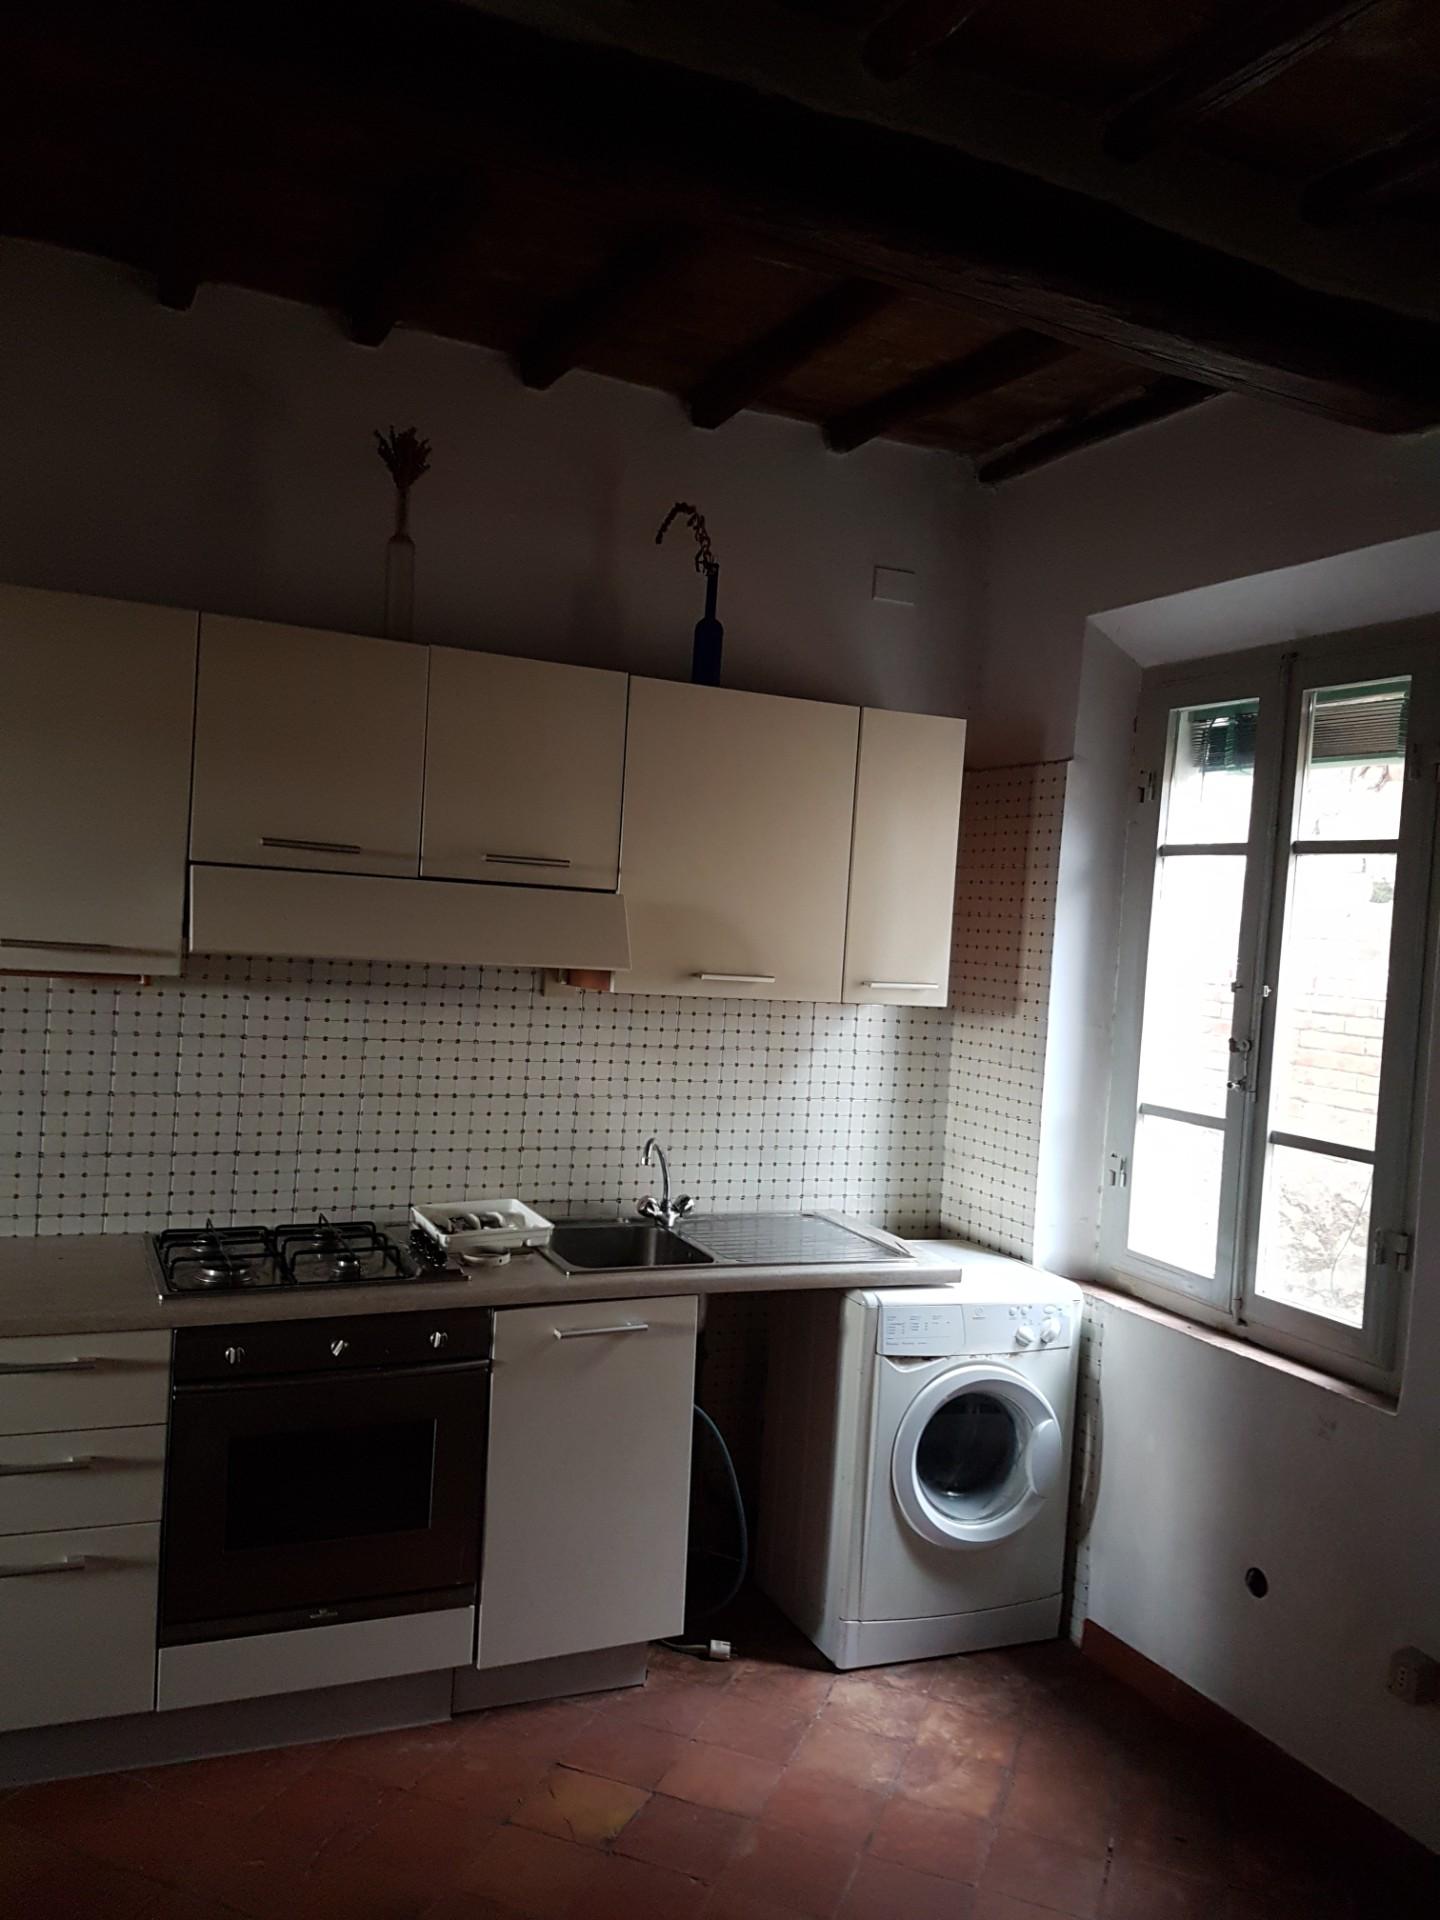 Semi-detached house for sale, ref. 794